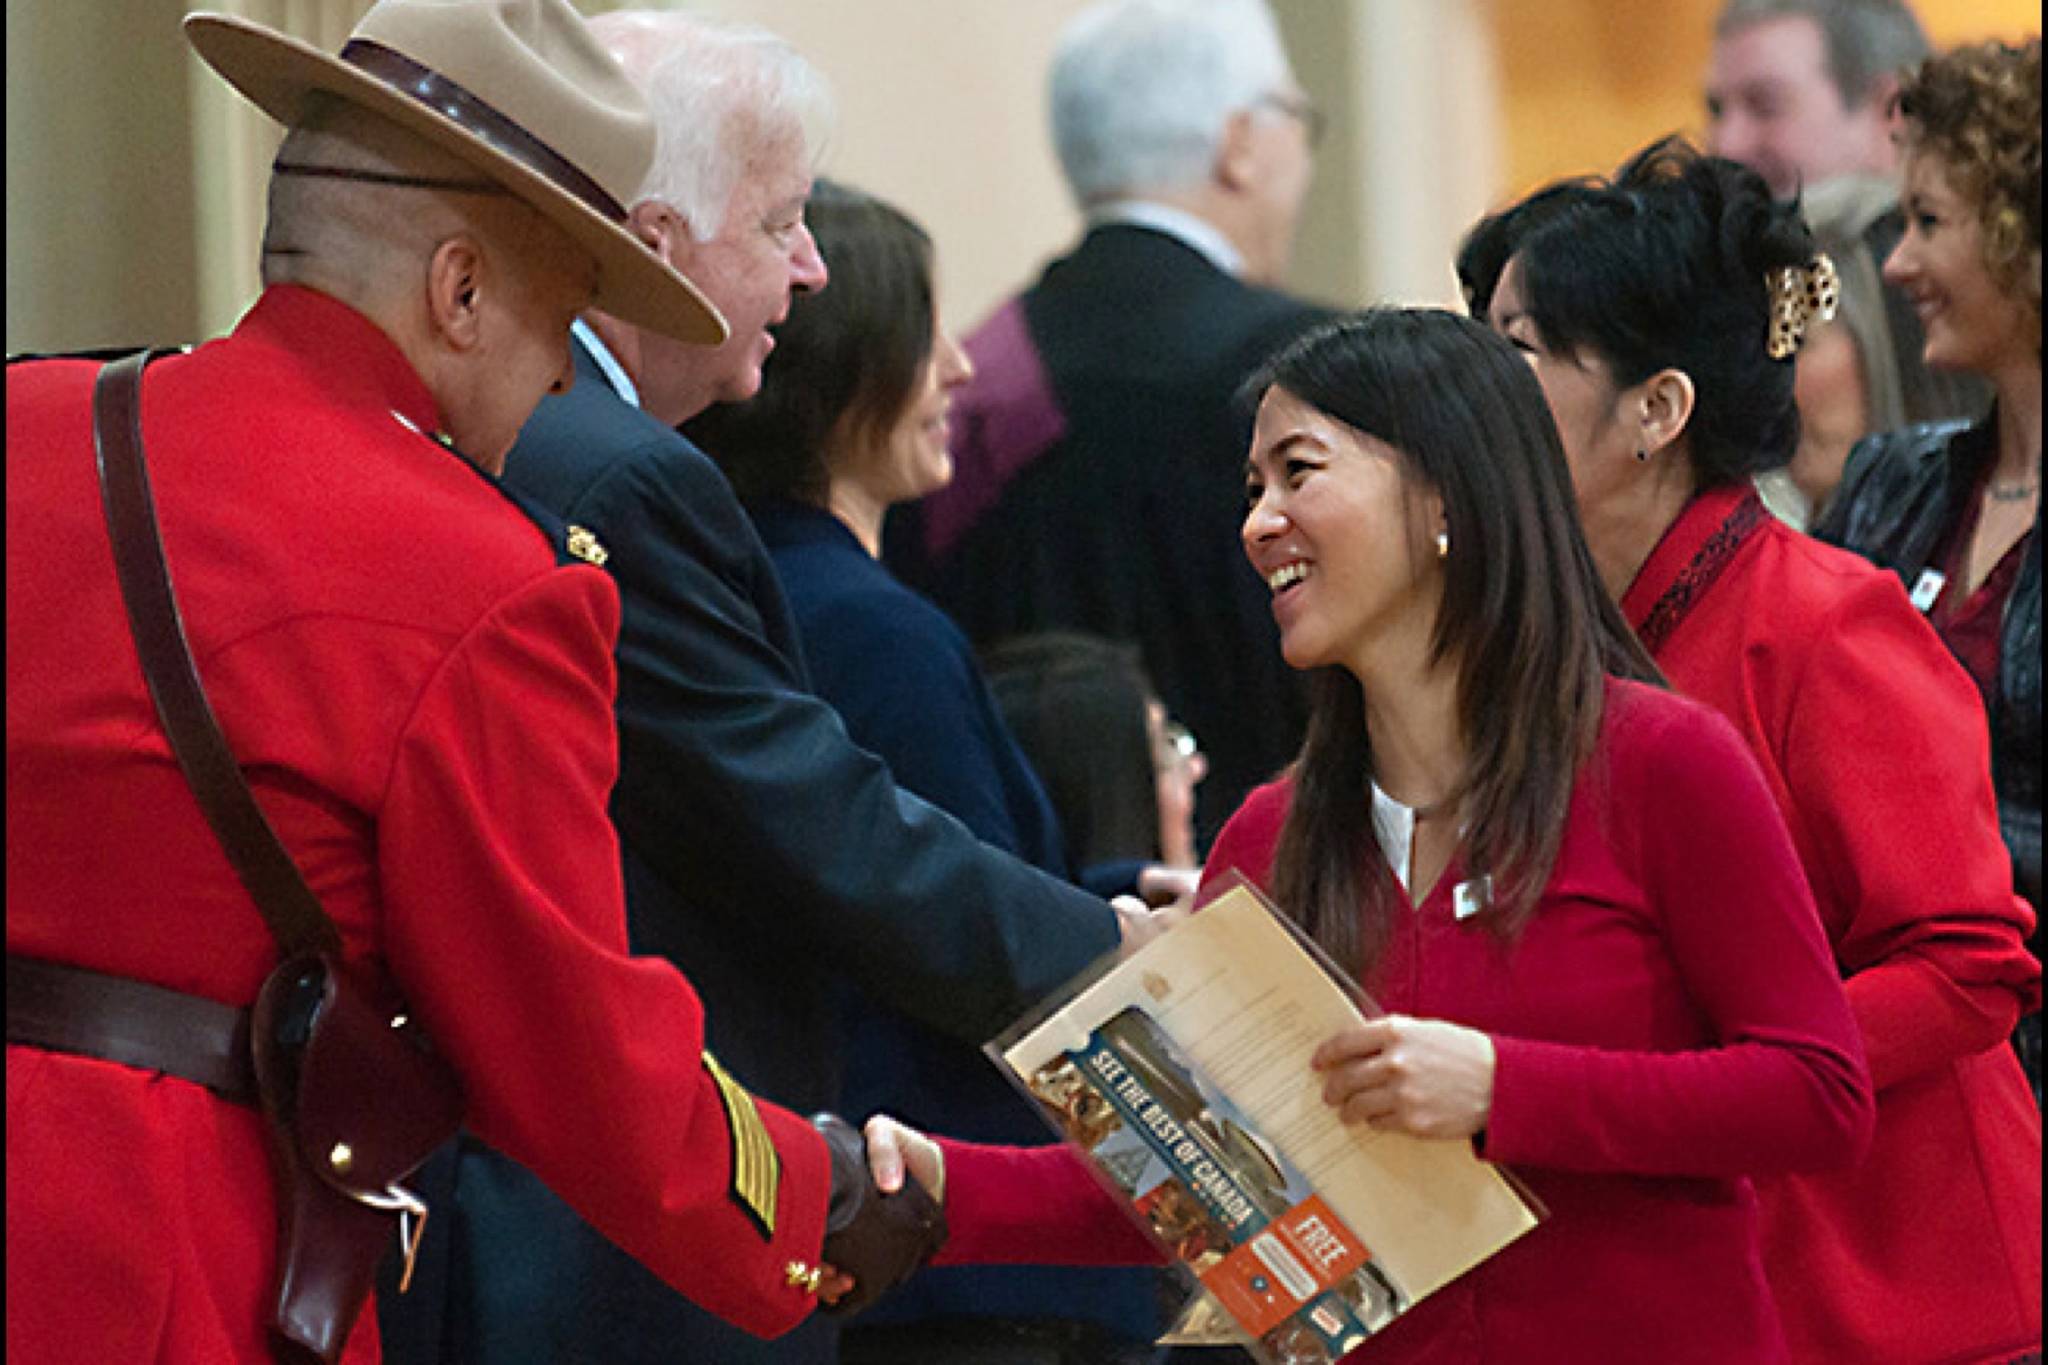 Phuong Nguyen, right, originally from Vietnam, is greeted by Oceanside RCMP Staff Sgt. Marc Pelletier after receiving her Canadian citizenship certificate. (Black Press Files)